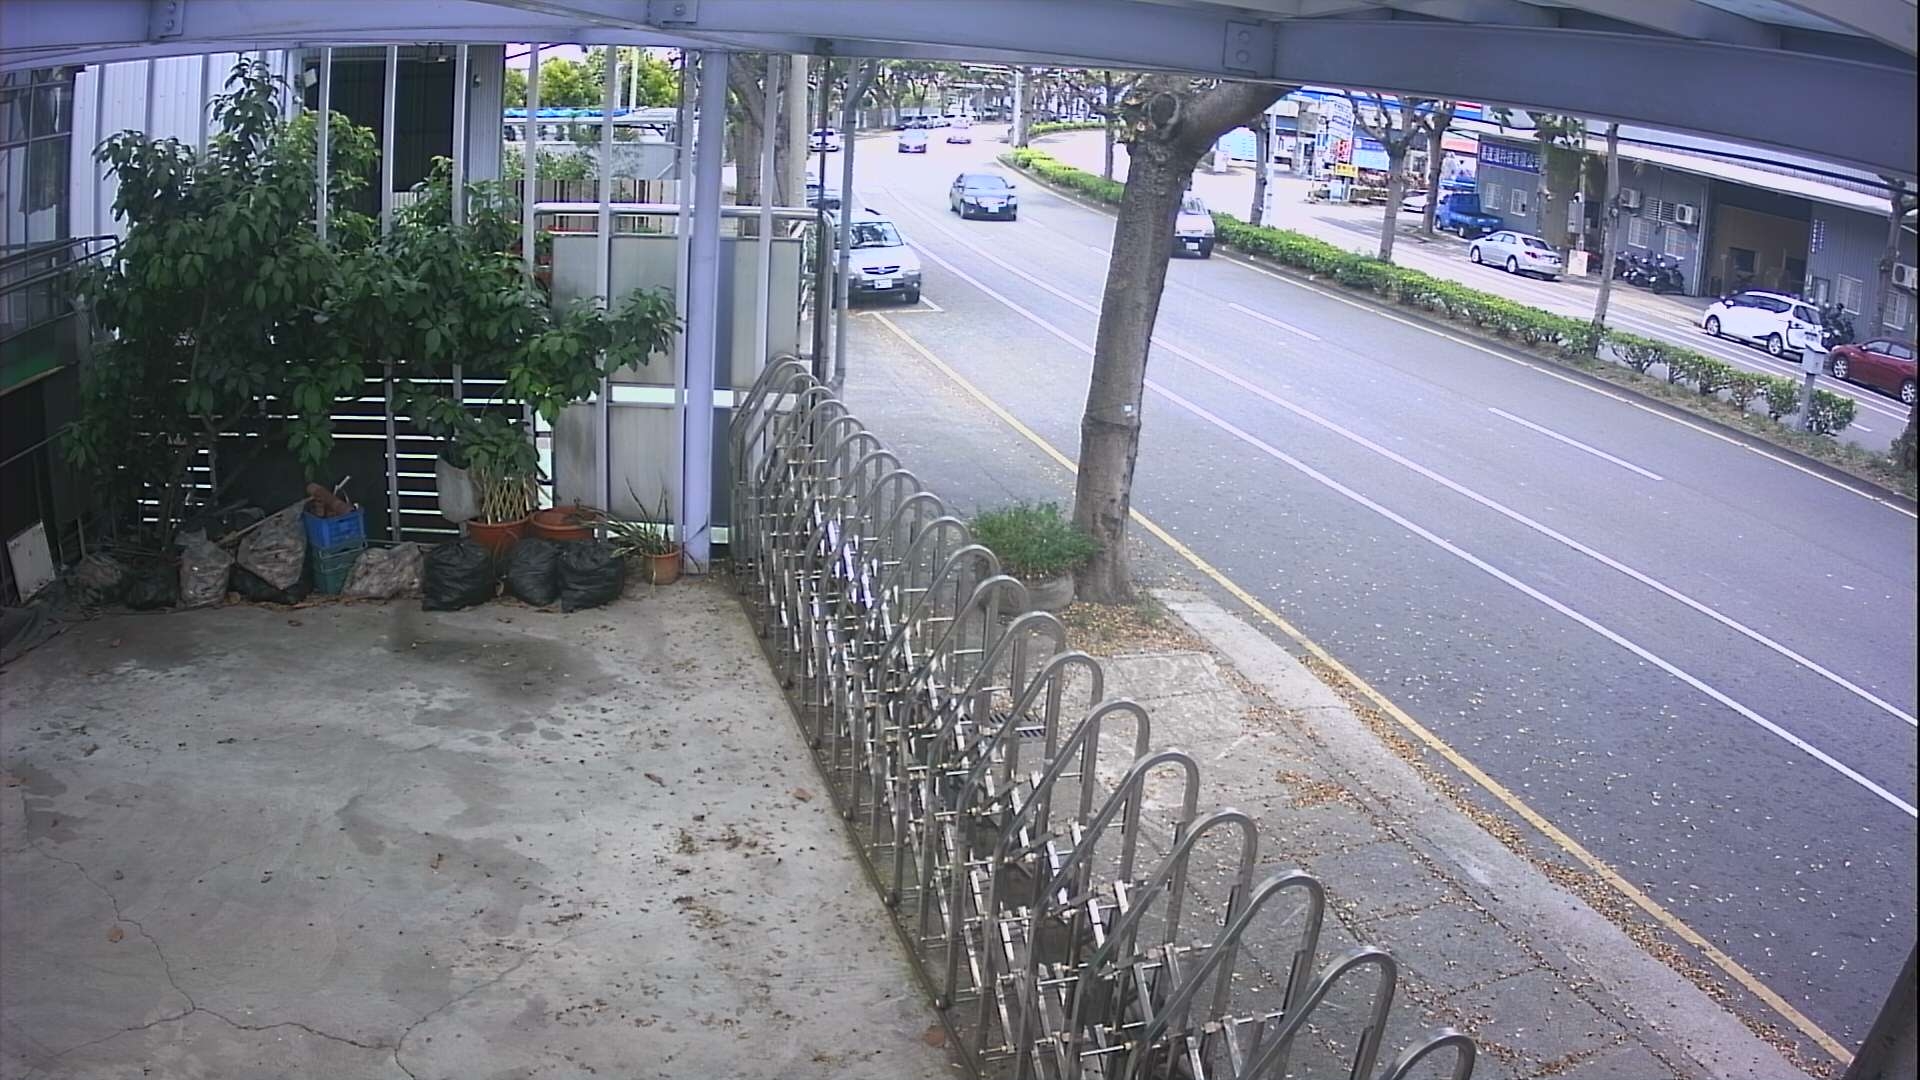 preview: IP camera - Taichung